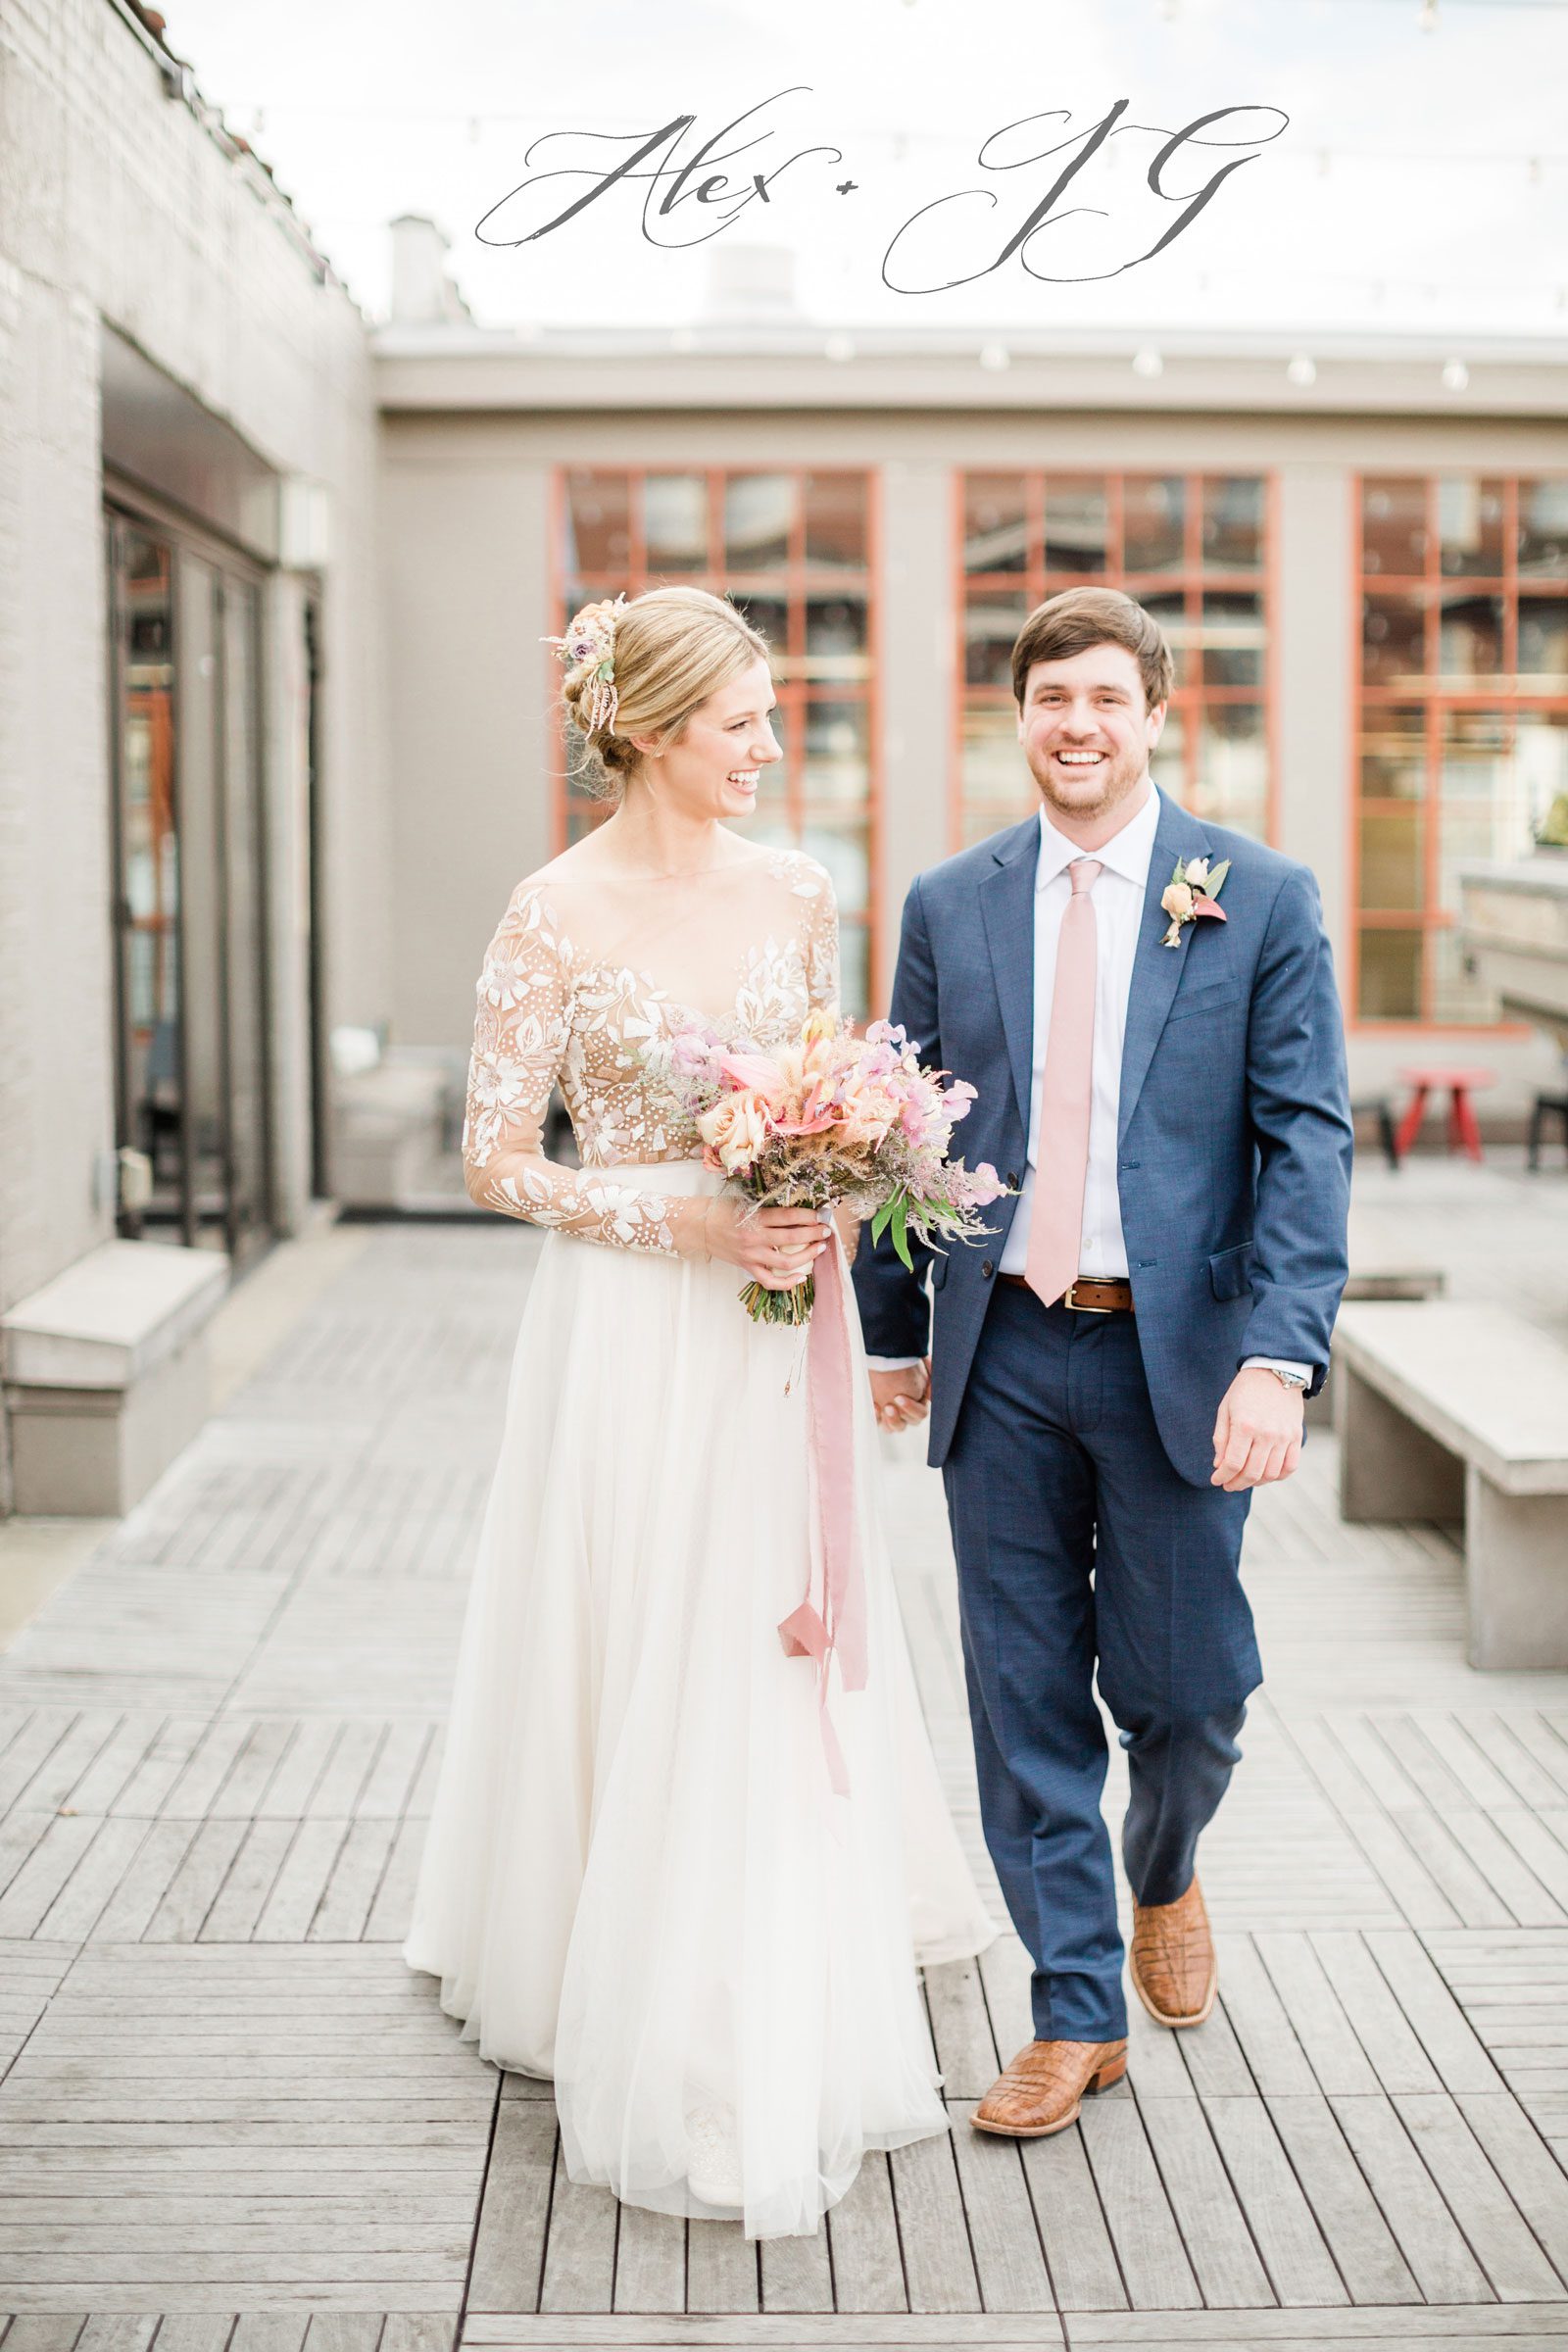 AlexJGWEDDINGPREVIEW-23 Southern Meets Modern at this Old Dominick Distillery Memphis Wedding